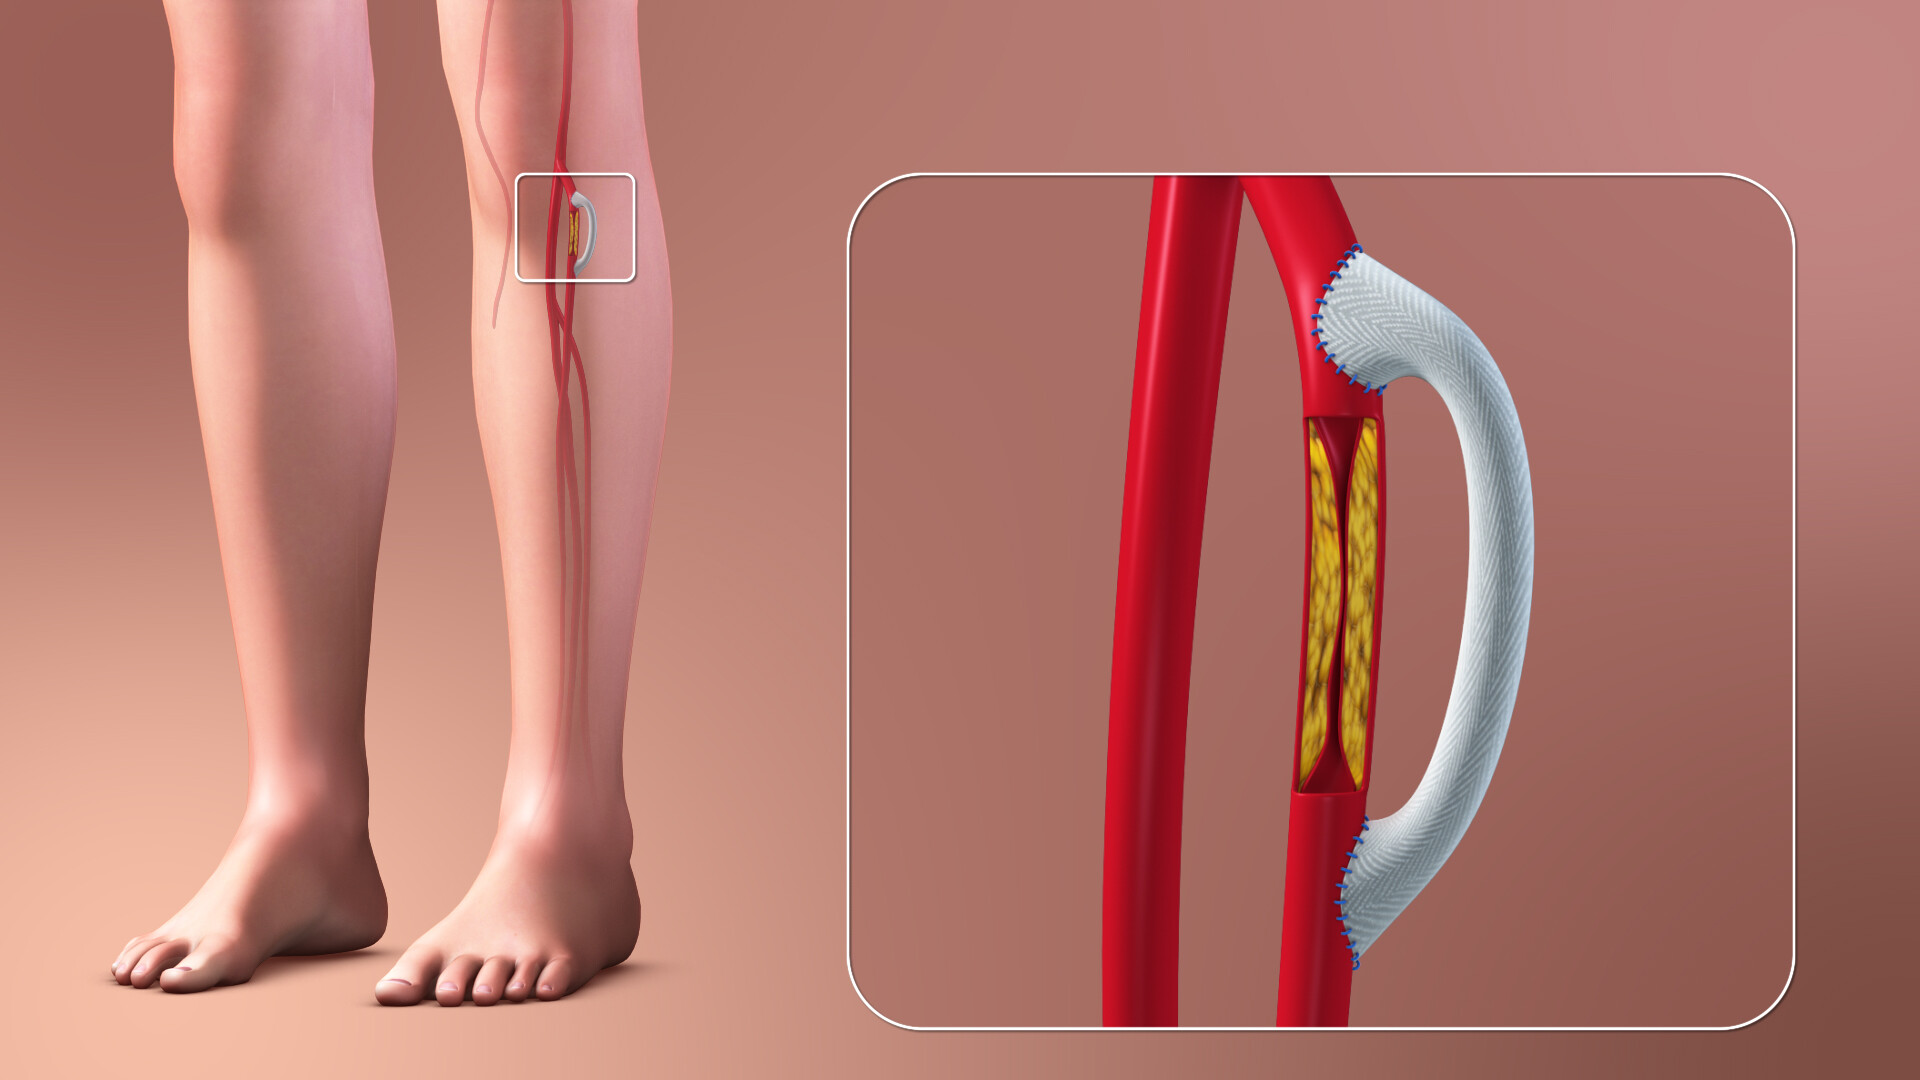 How Is Peripheral Artery Disease Treated? - StoryMD